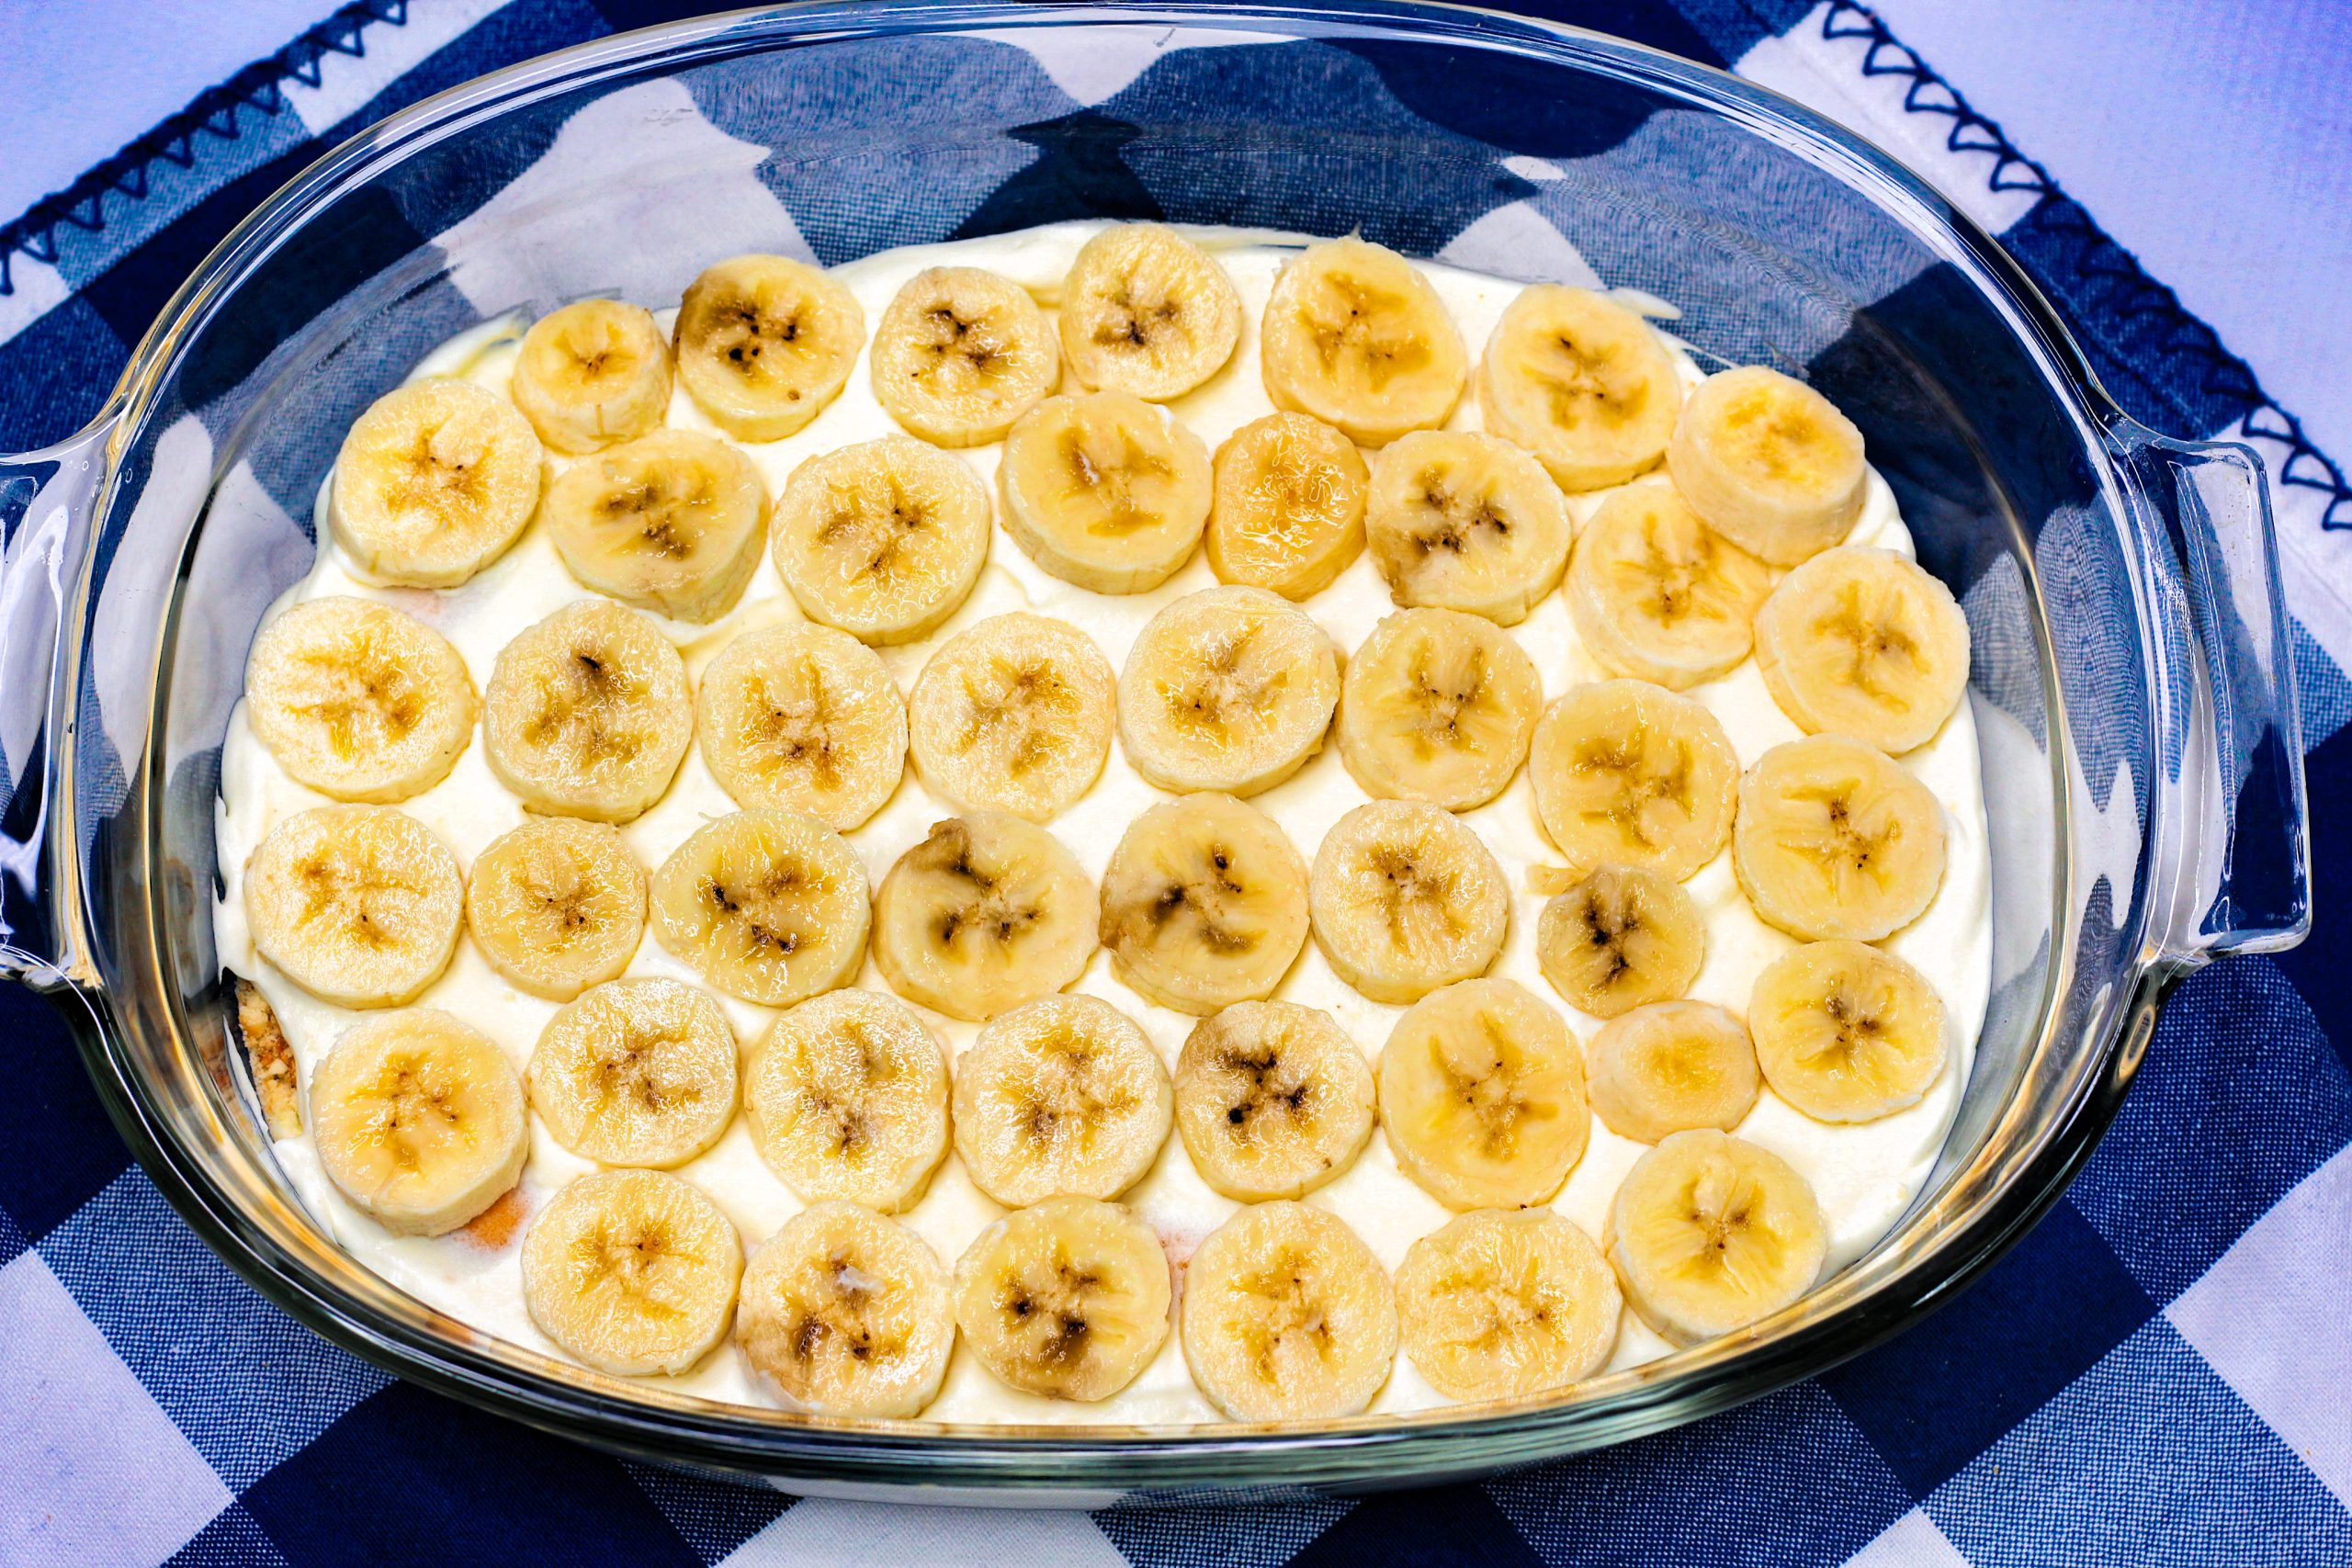 Place a layer of sliced bananas